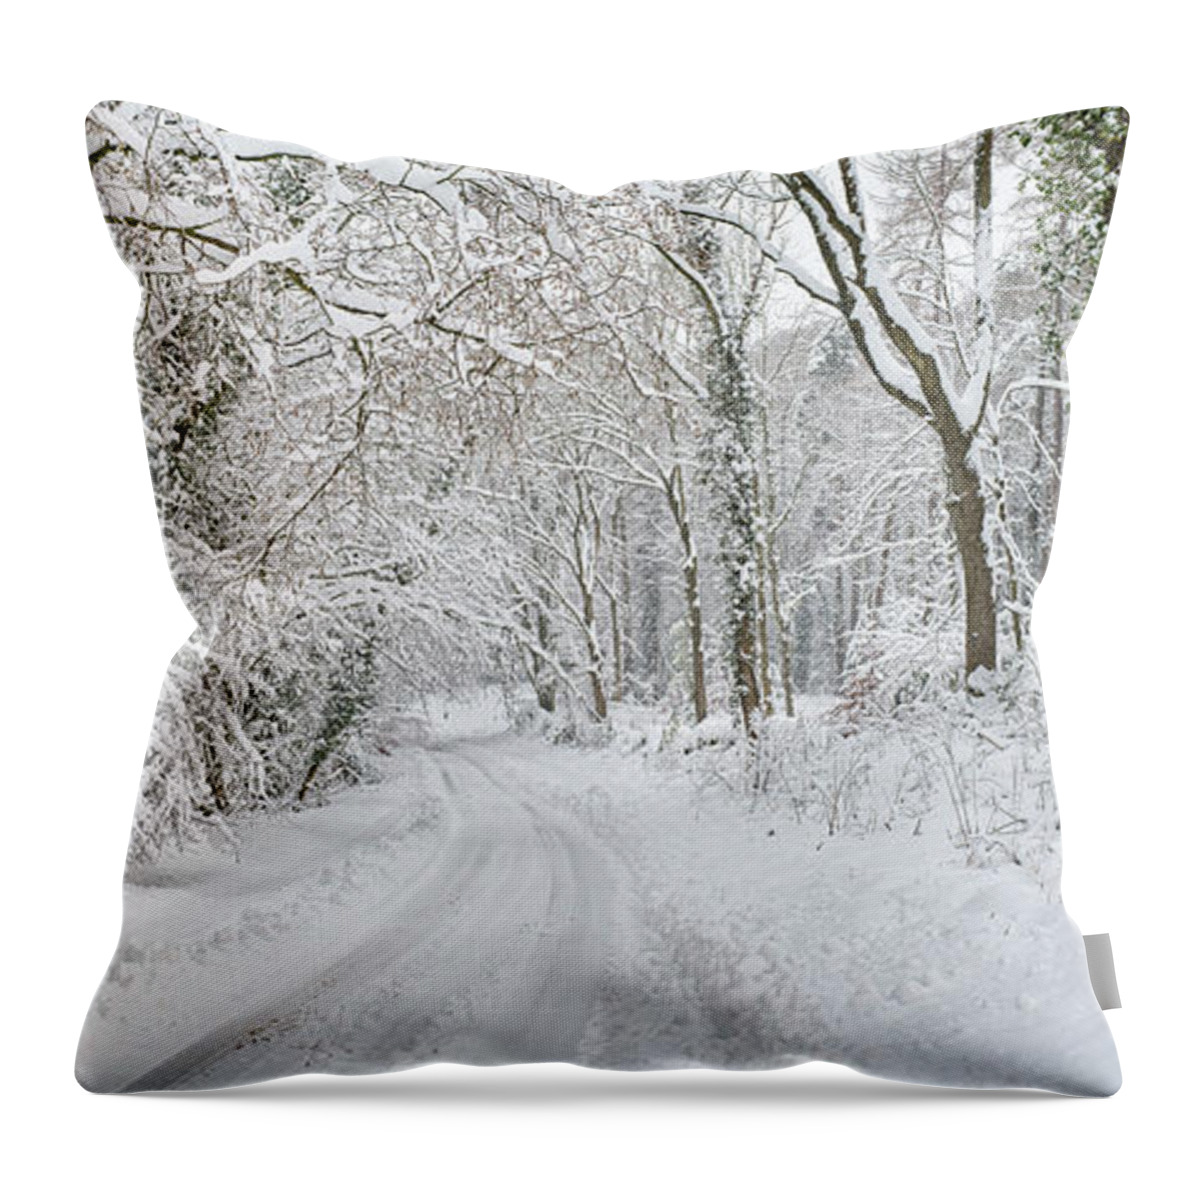 Snow Throw Pillow featuring the photograph Snow Covered Country Road Near Snowshill Cotswolds by Tim Gainey